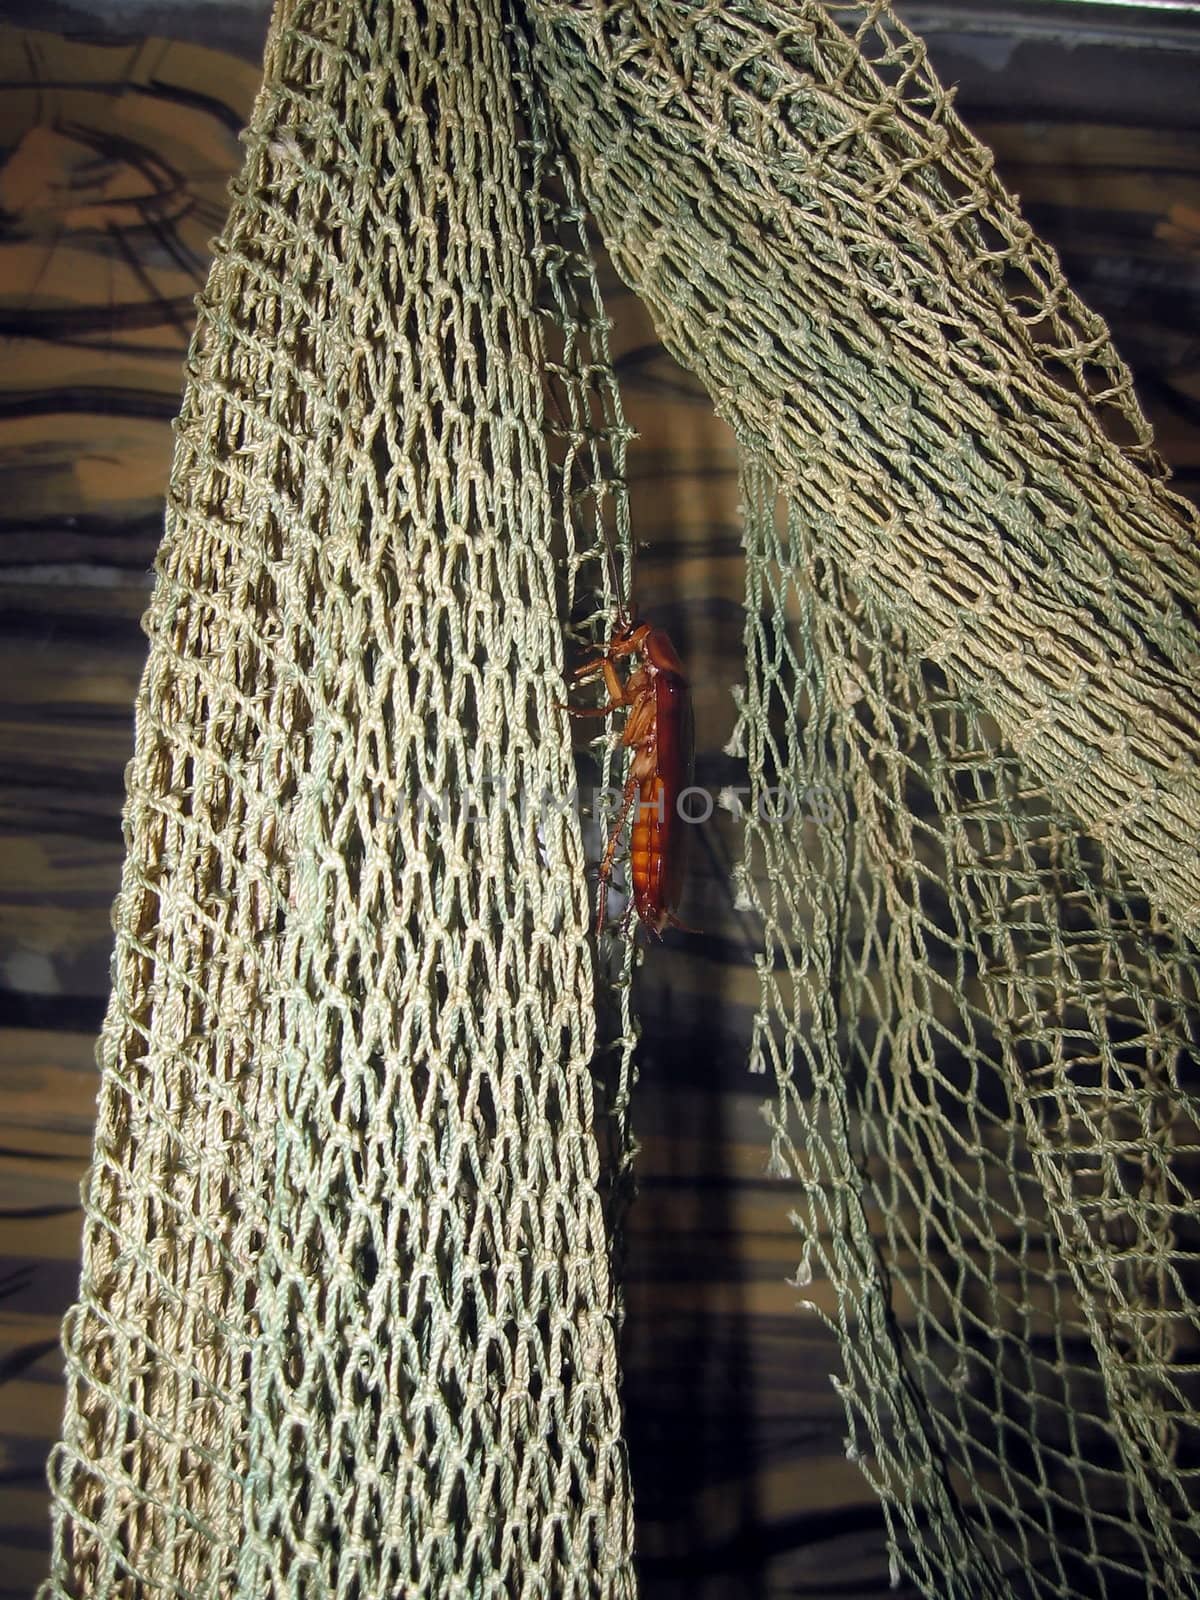 Cockroach on the net by tomatto